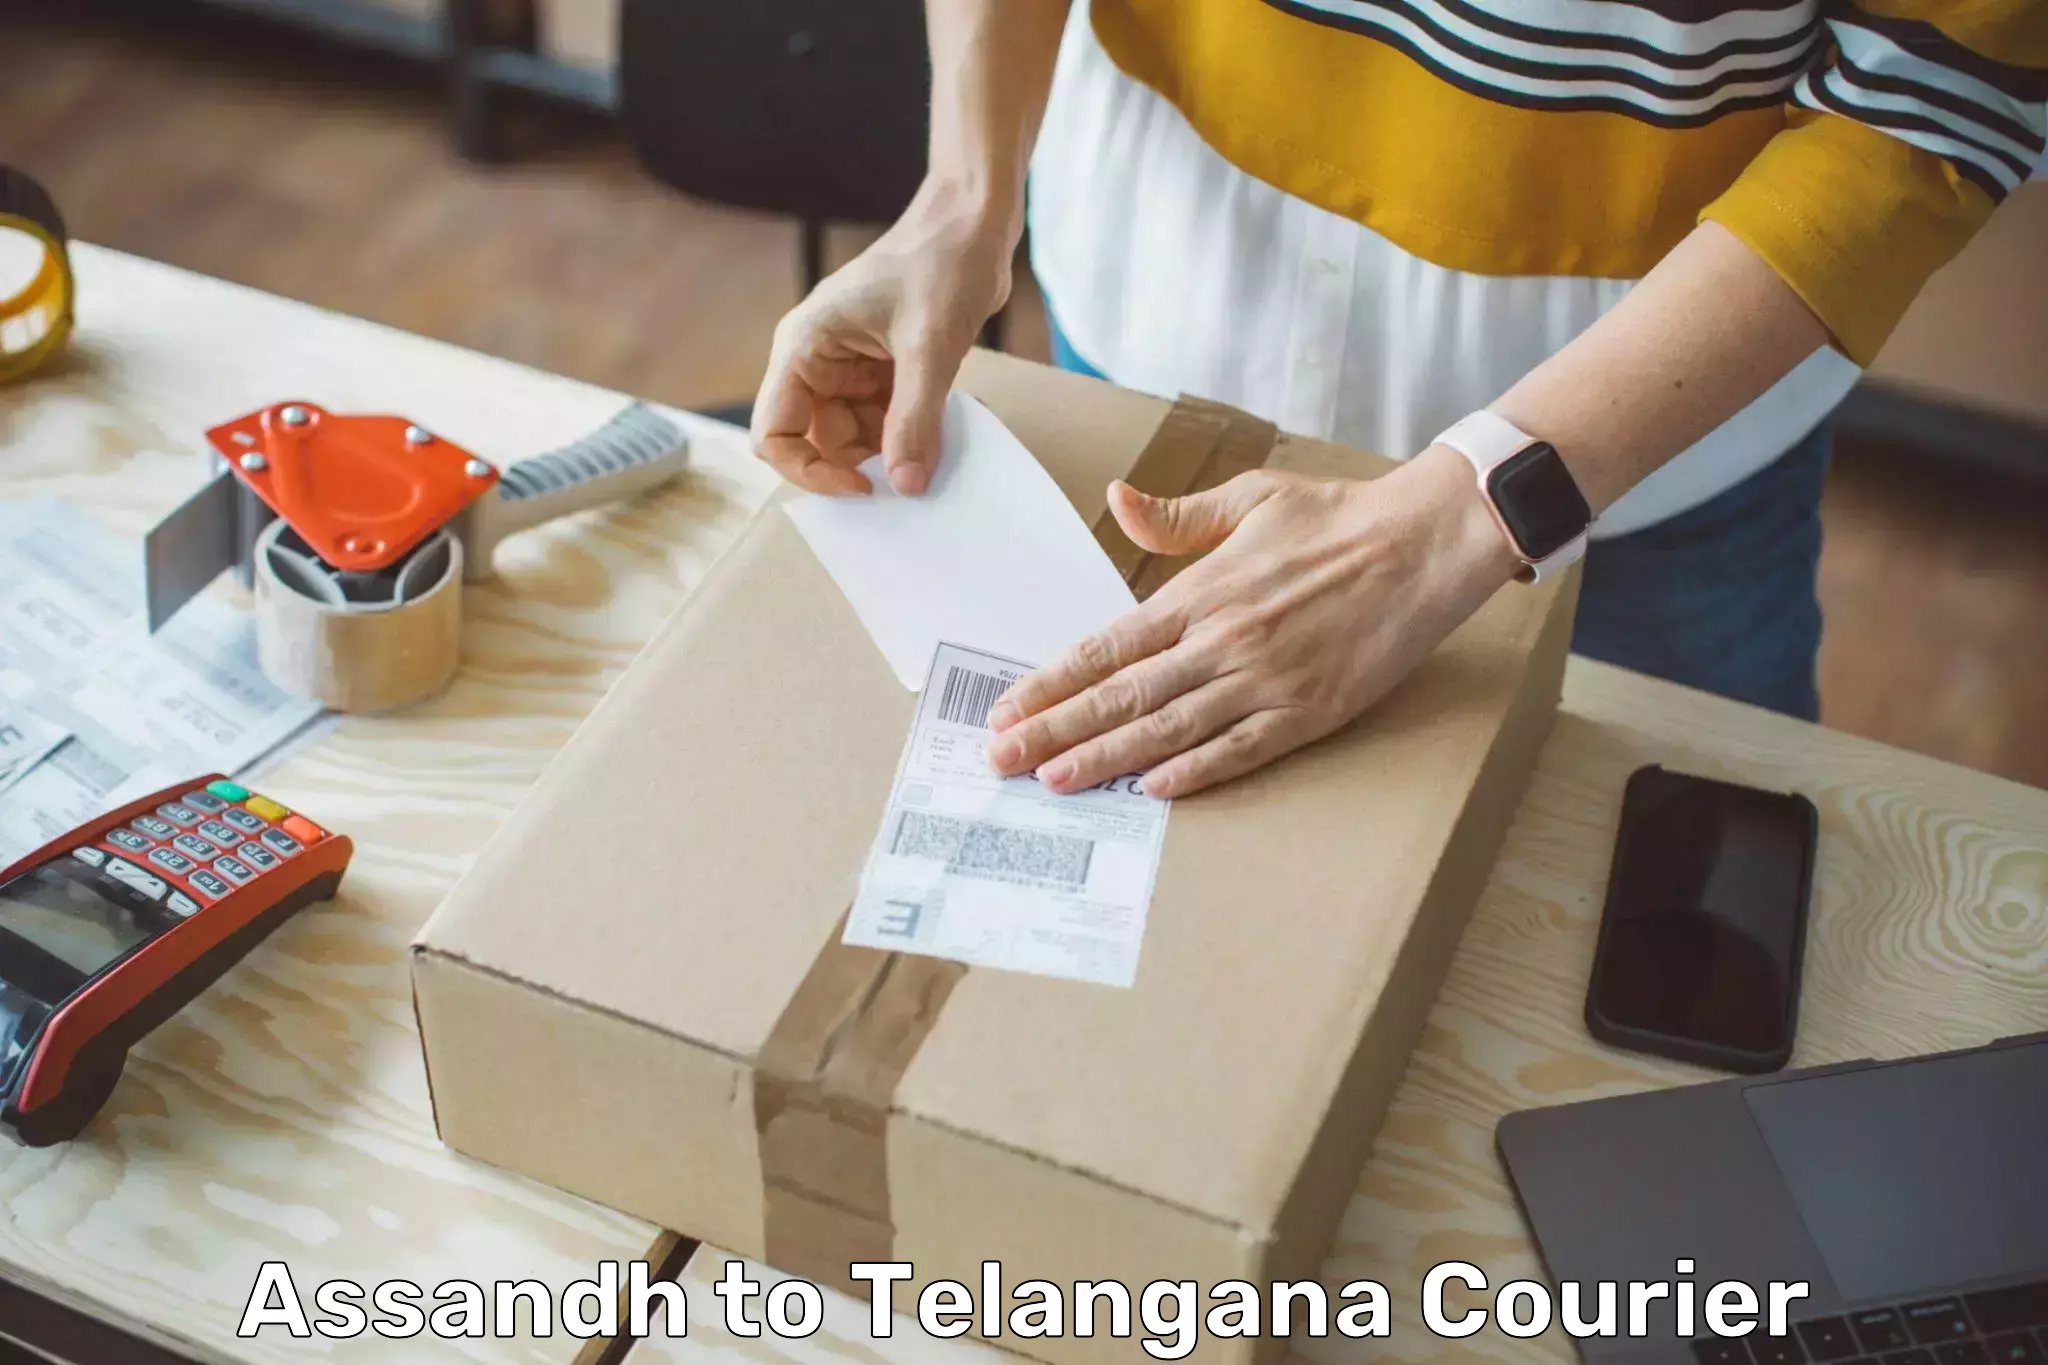 Courier app in Assandh to Vemulawada